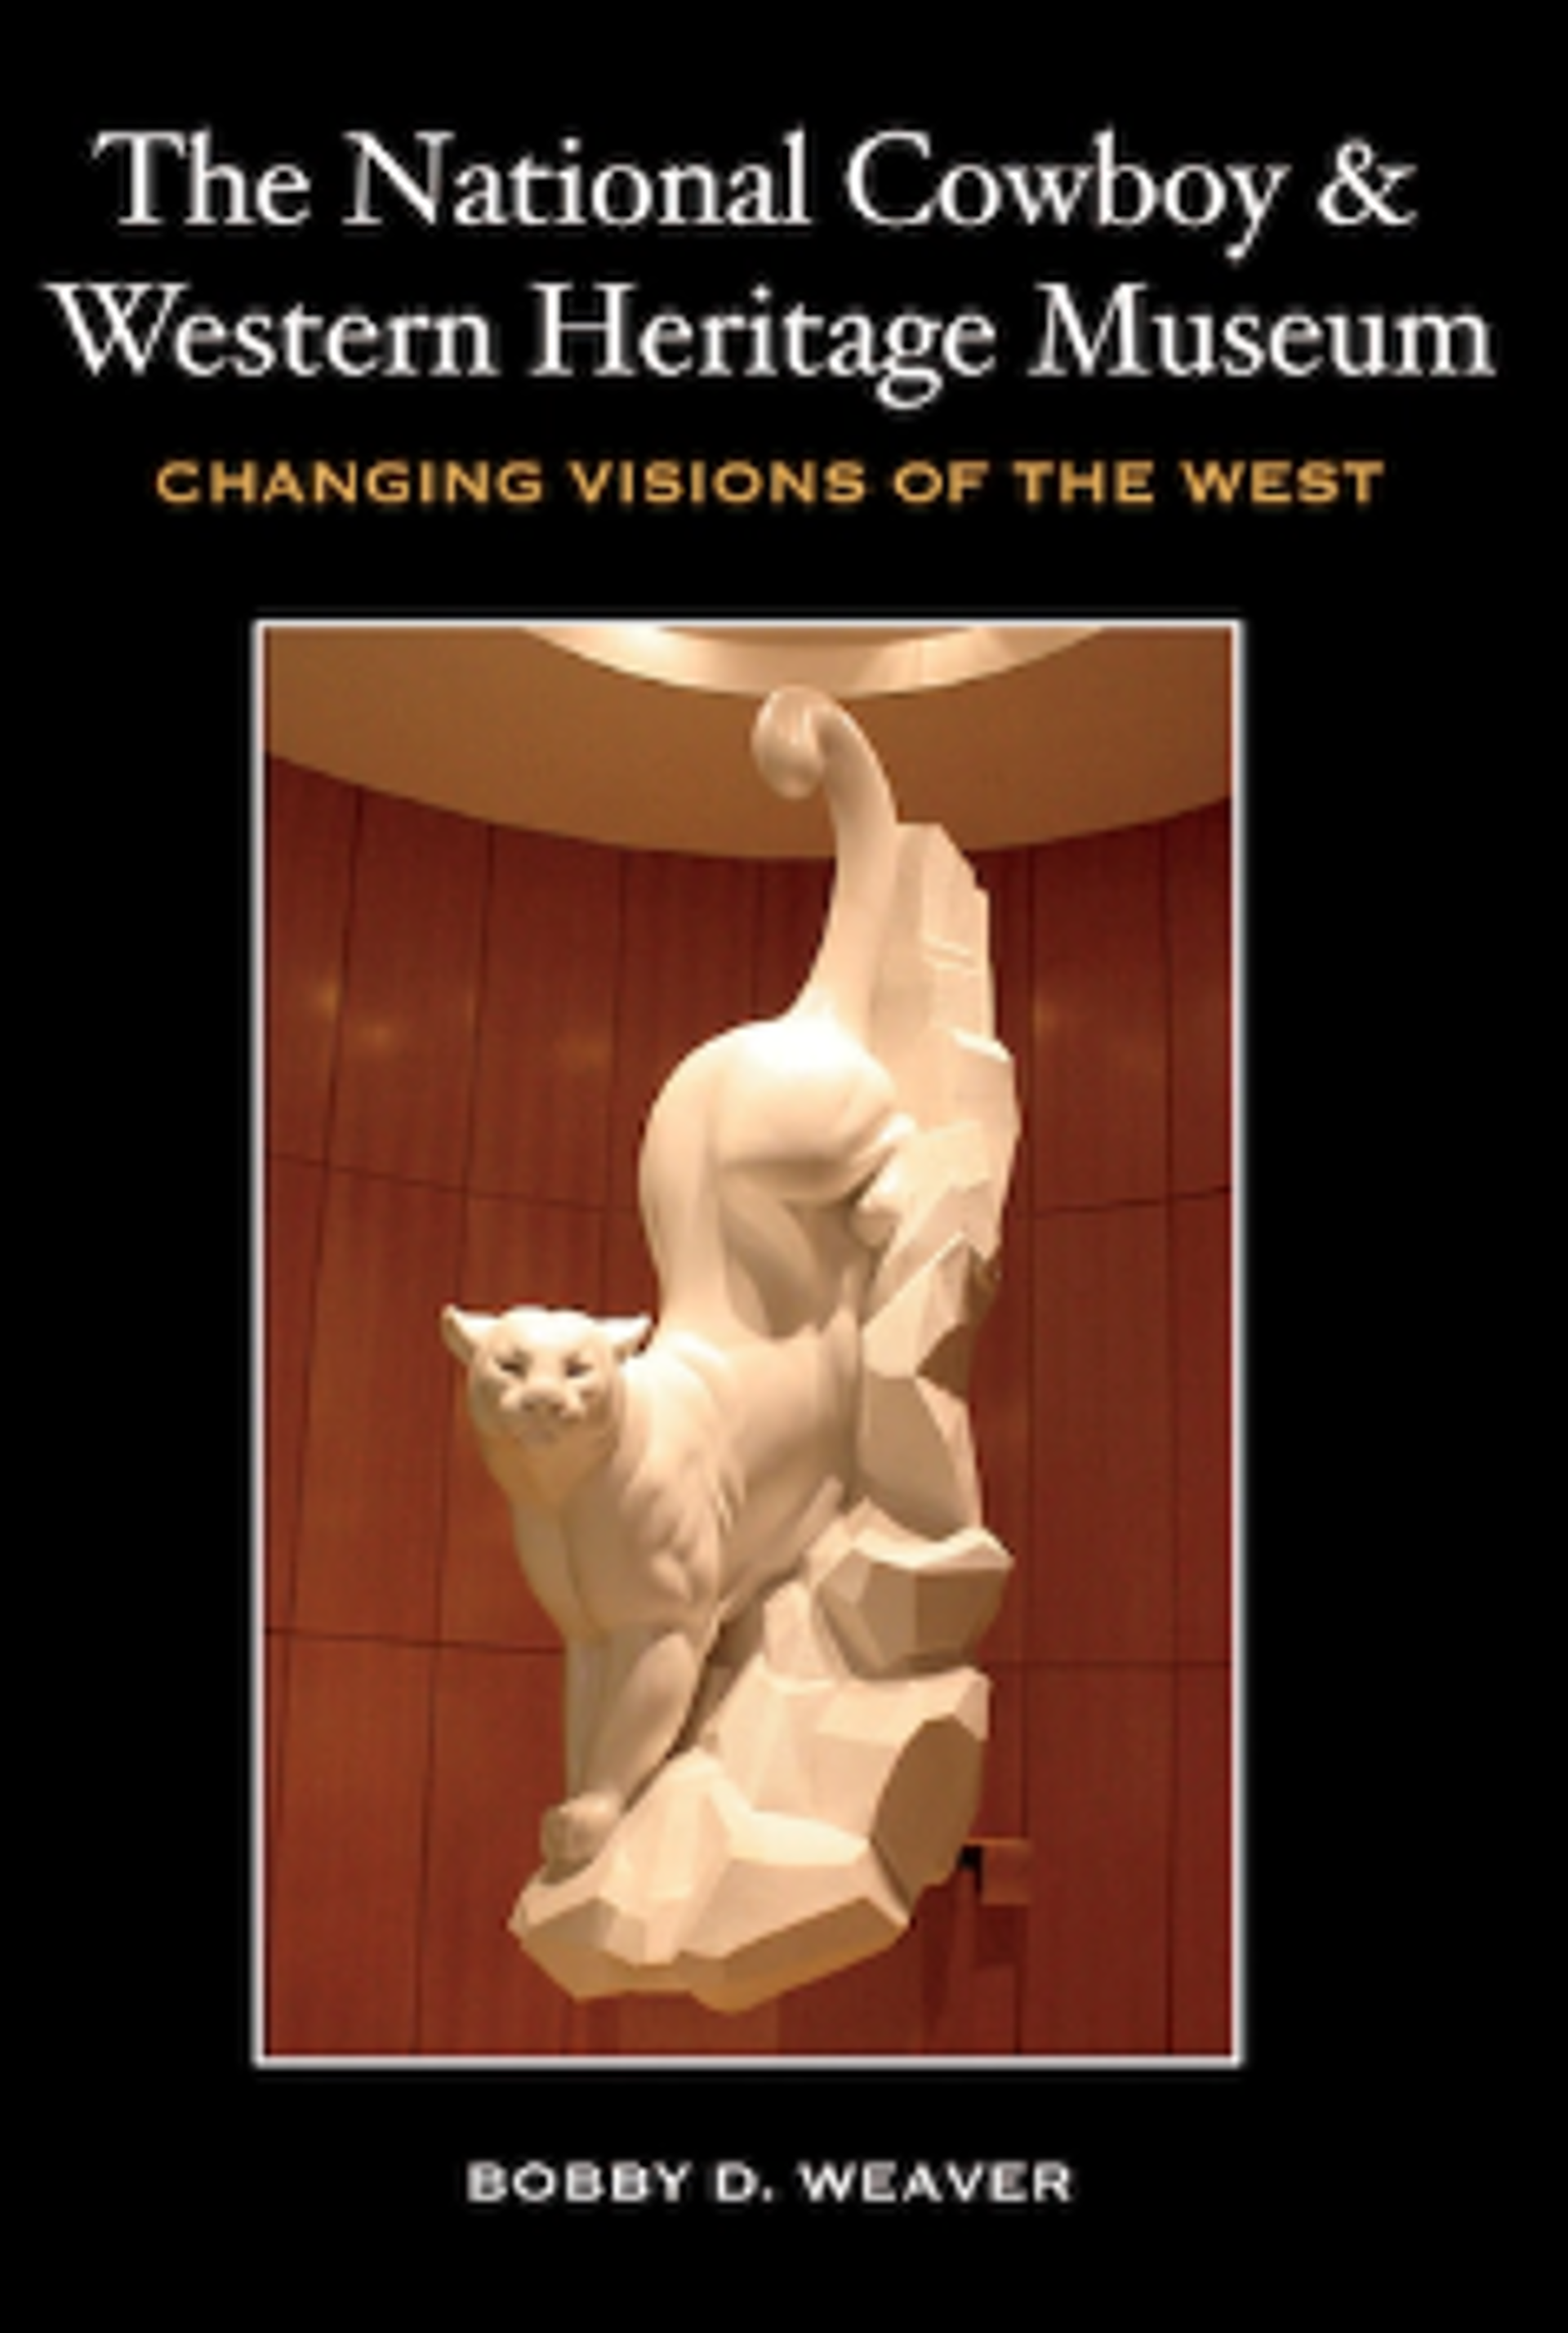 The National Cowboy & Western Heritage Museum Changing Visions of the West By Bobby D. Weaver by Publications